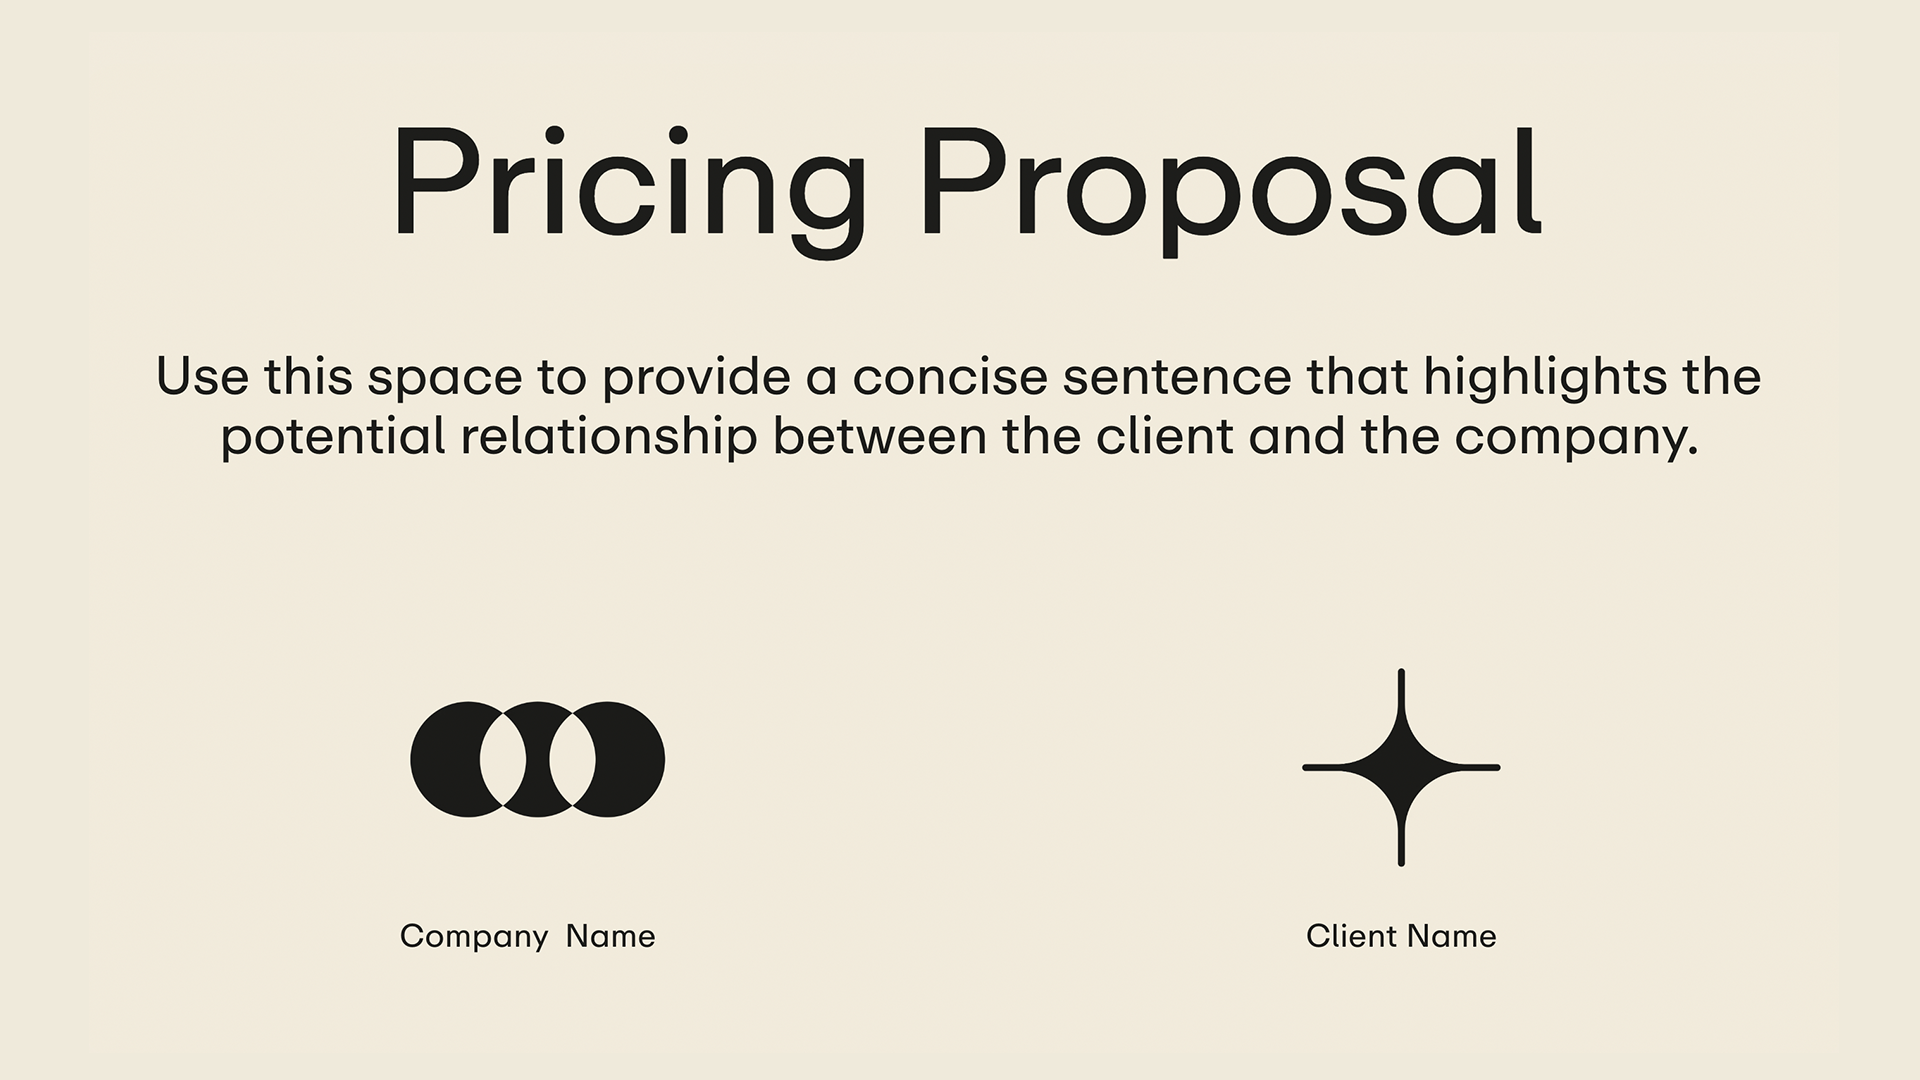 Pricing Proposal - Title